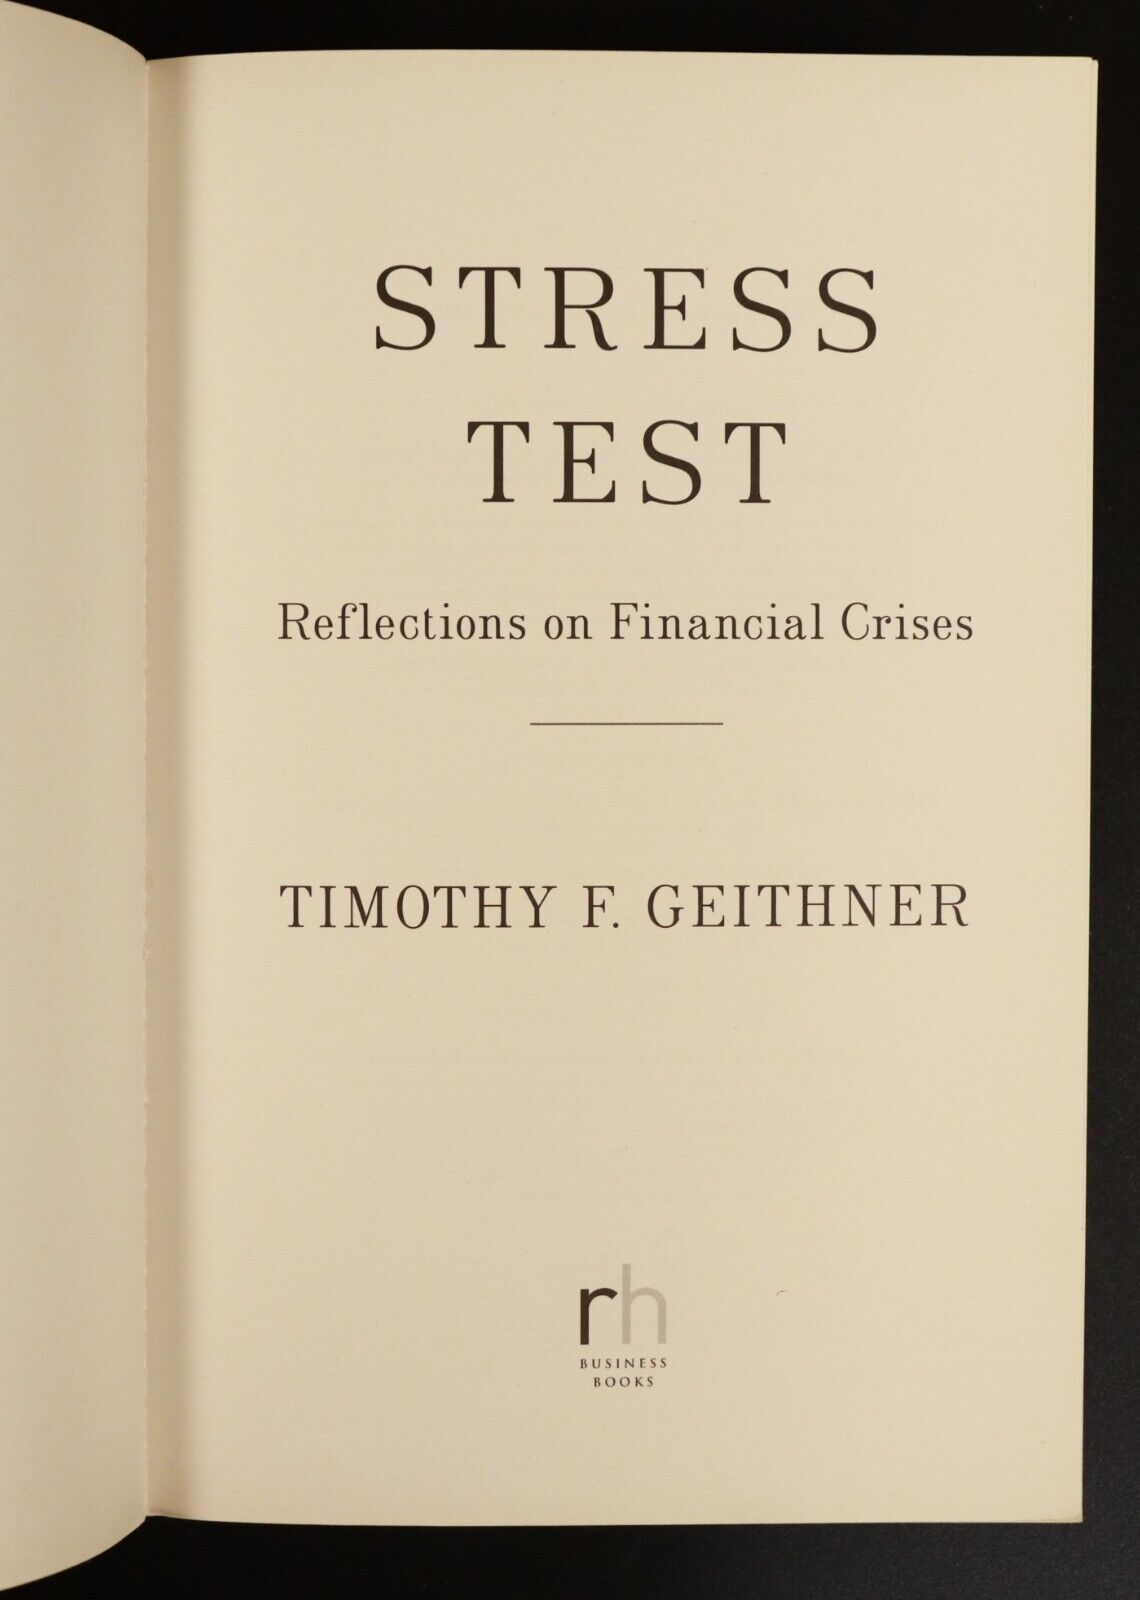 2014 Stress Test: Financial Crises by Timothy Geithner Financial History Book